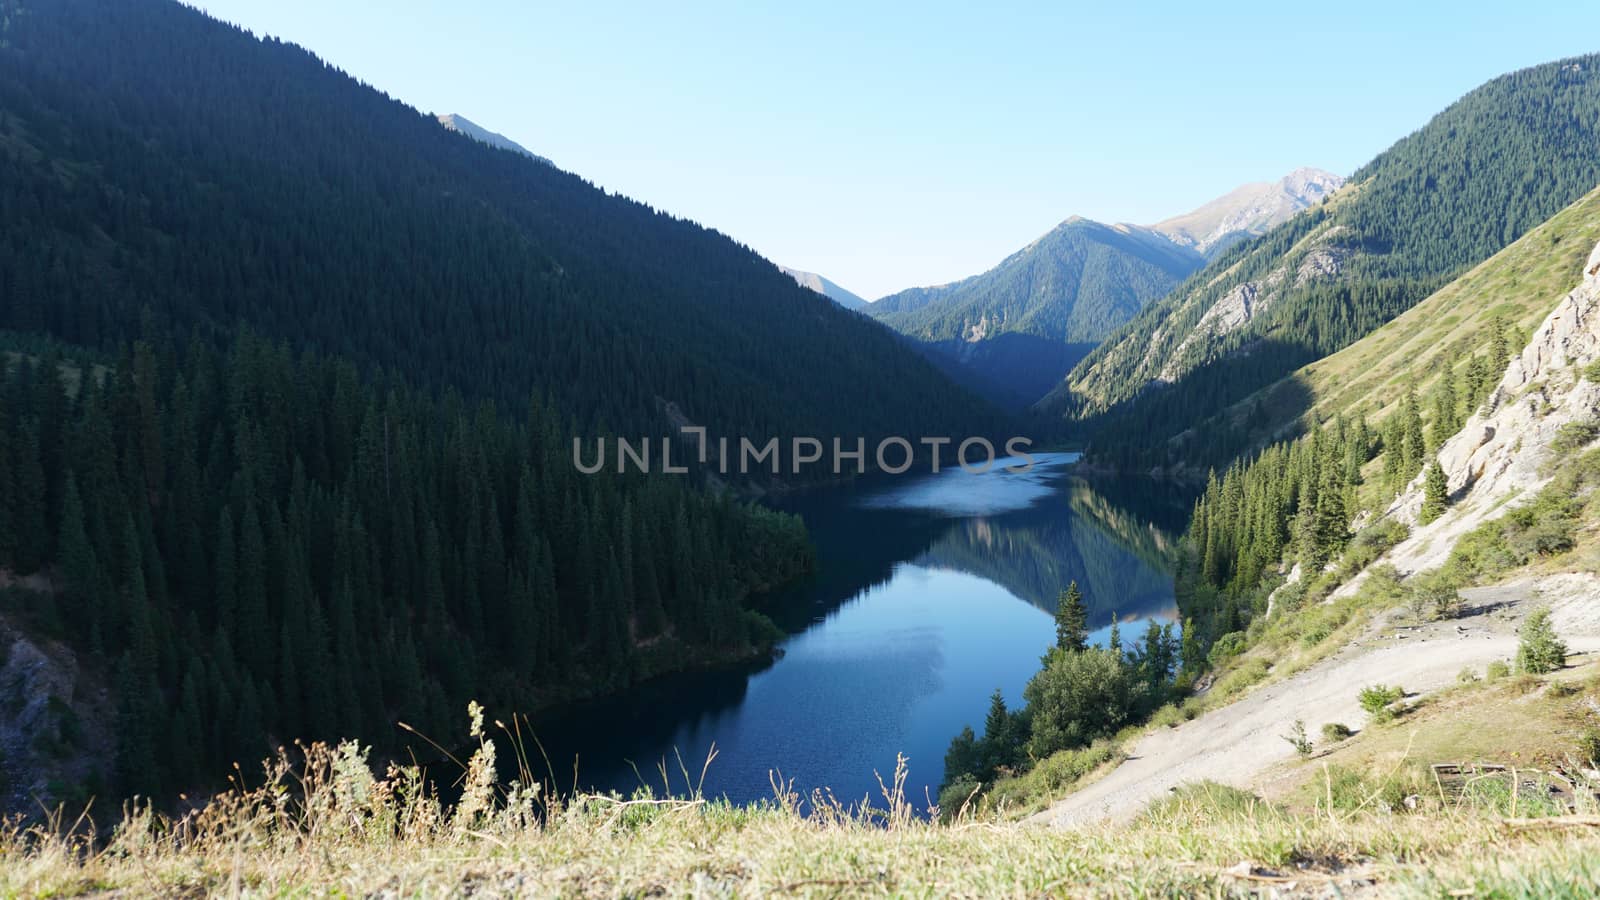 Kolsay lake among green hills and mountains. The mountain lake is surrounded by green forest, tall coniferous trees, grass and bushes. Clean water is like a mirror. Tourists swim on boats. Kazakhstan